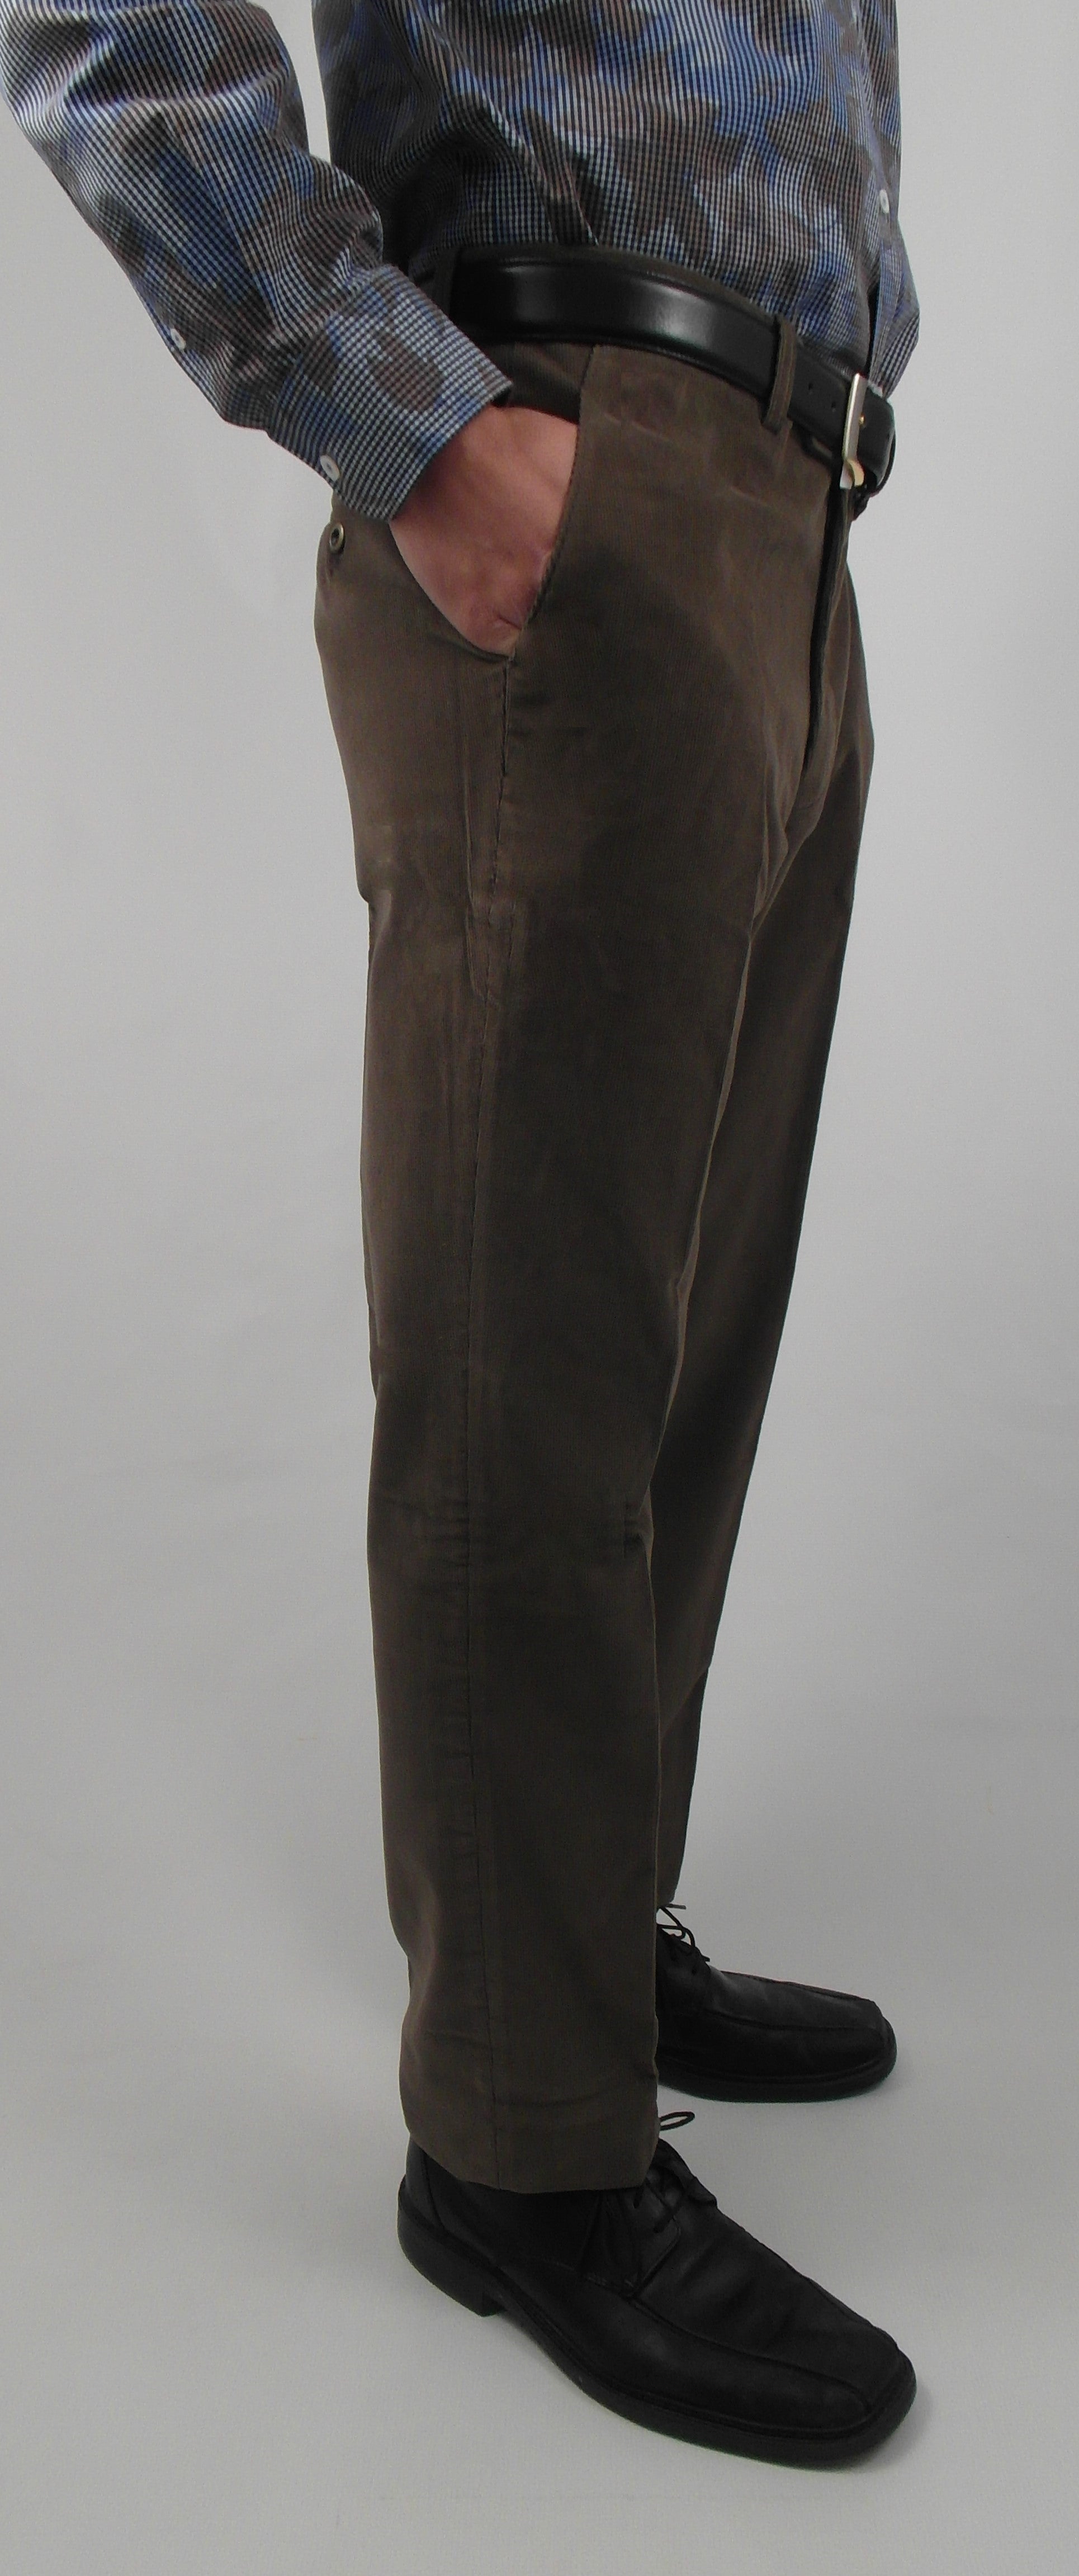 Gala - C2 - Stretch Corduroy Pant - plain front - Available in 7 Colou 